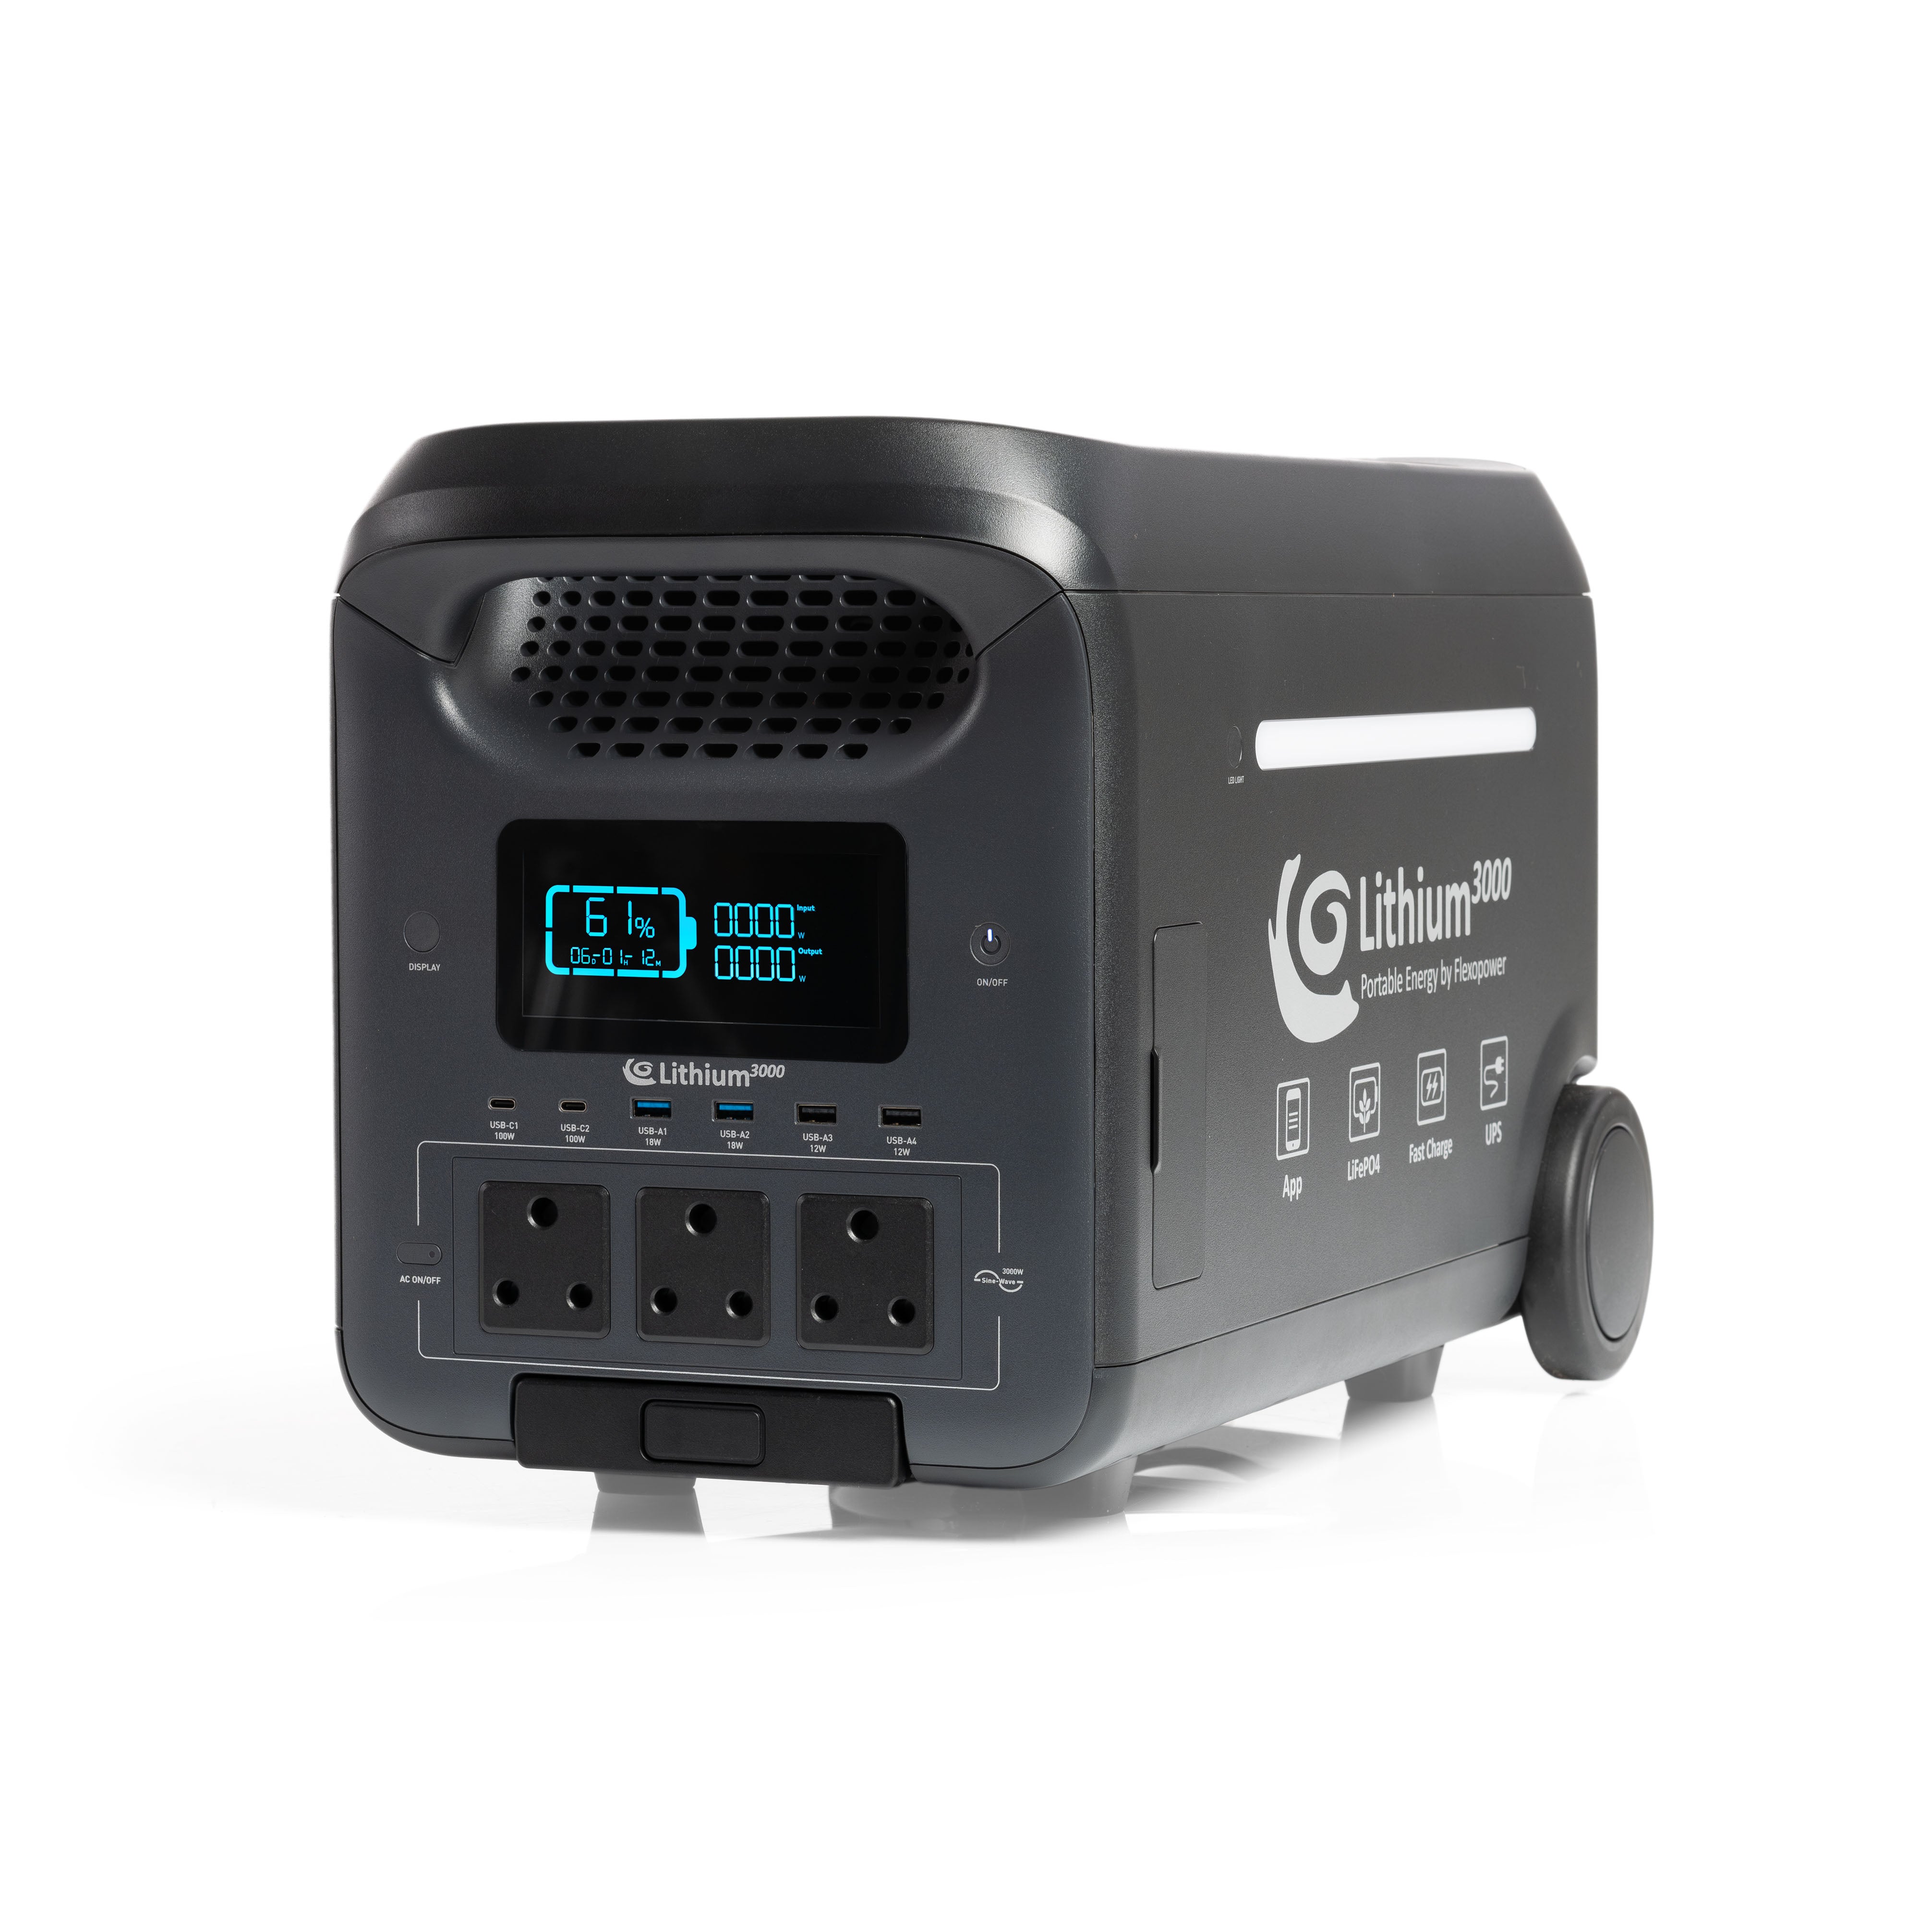 COMBO LITHIUM3000 WITH EXTRA BATTERY (5120WH/400Ah), KALAHARI800W (2x400W), 20M EXTENSION CABLE - PLUG AND PLAY